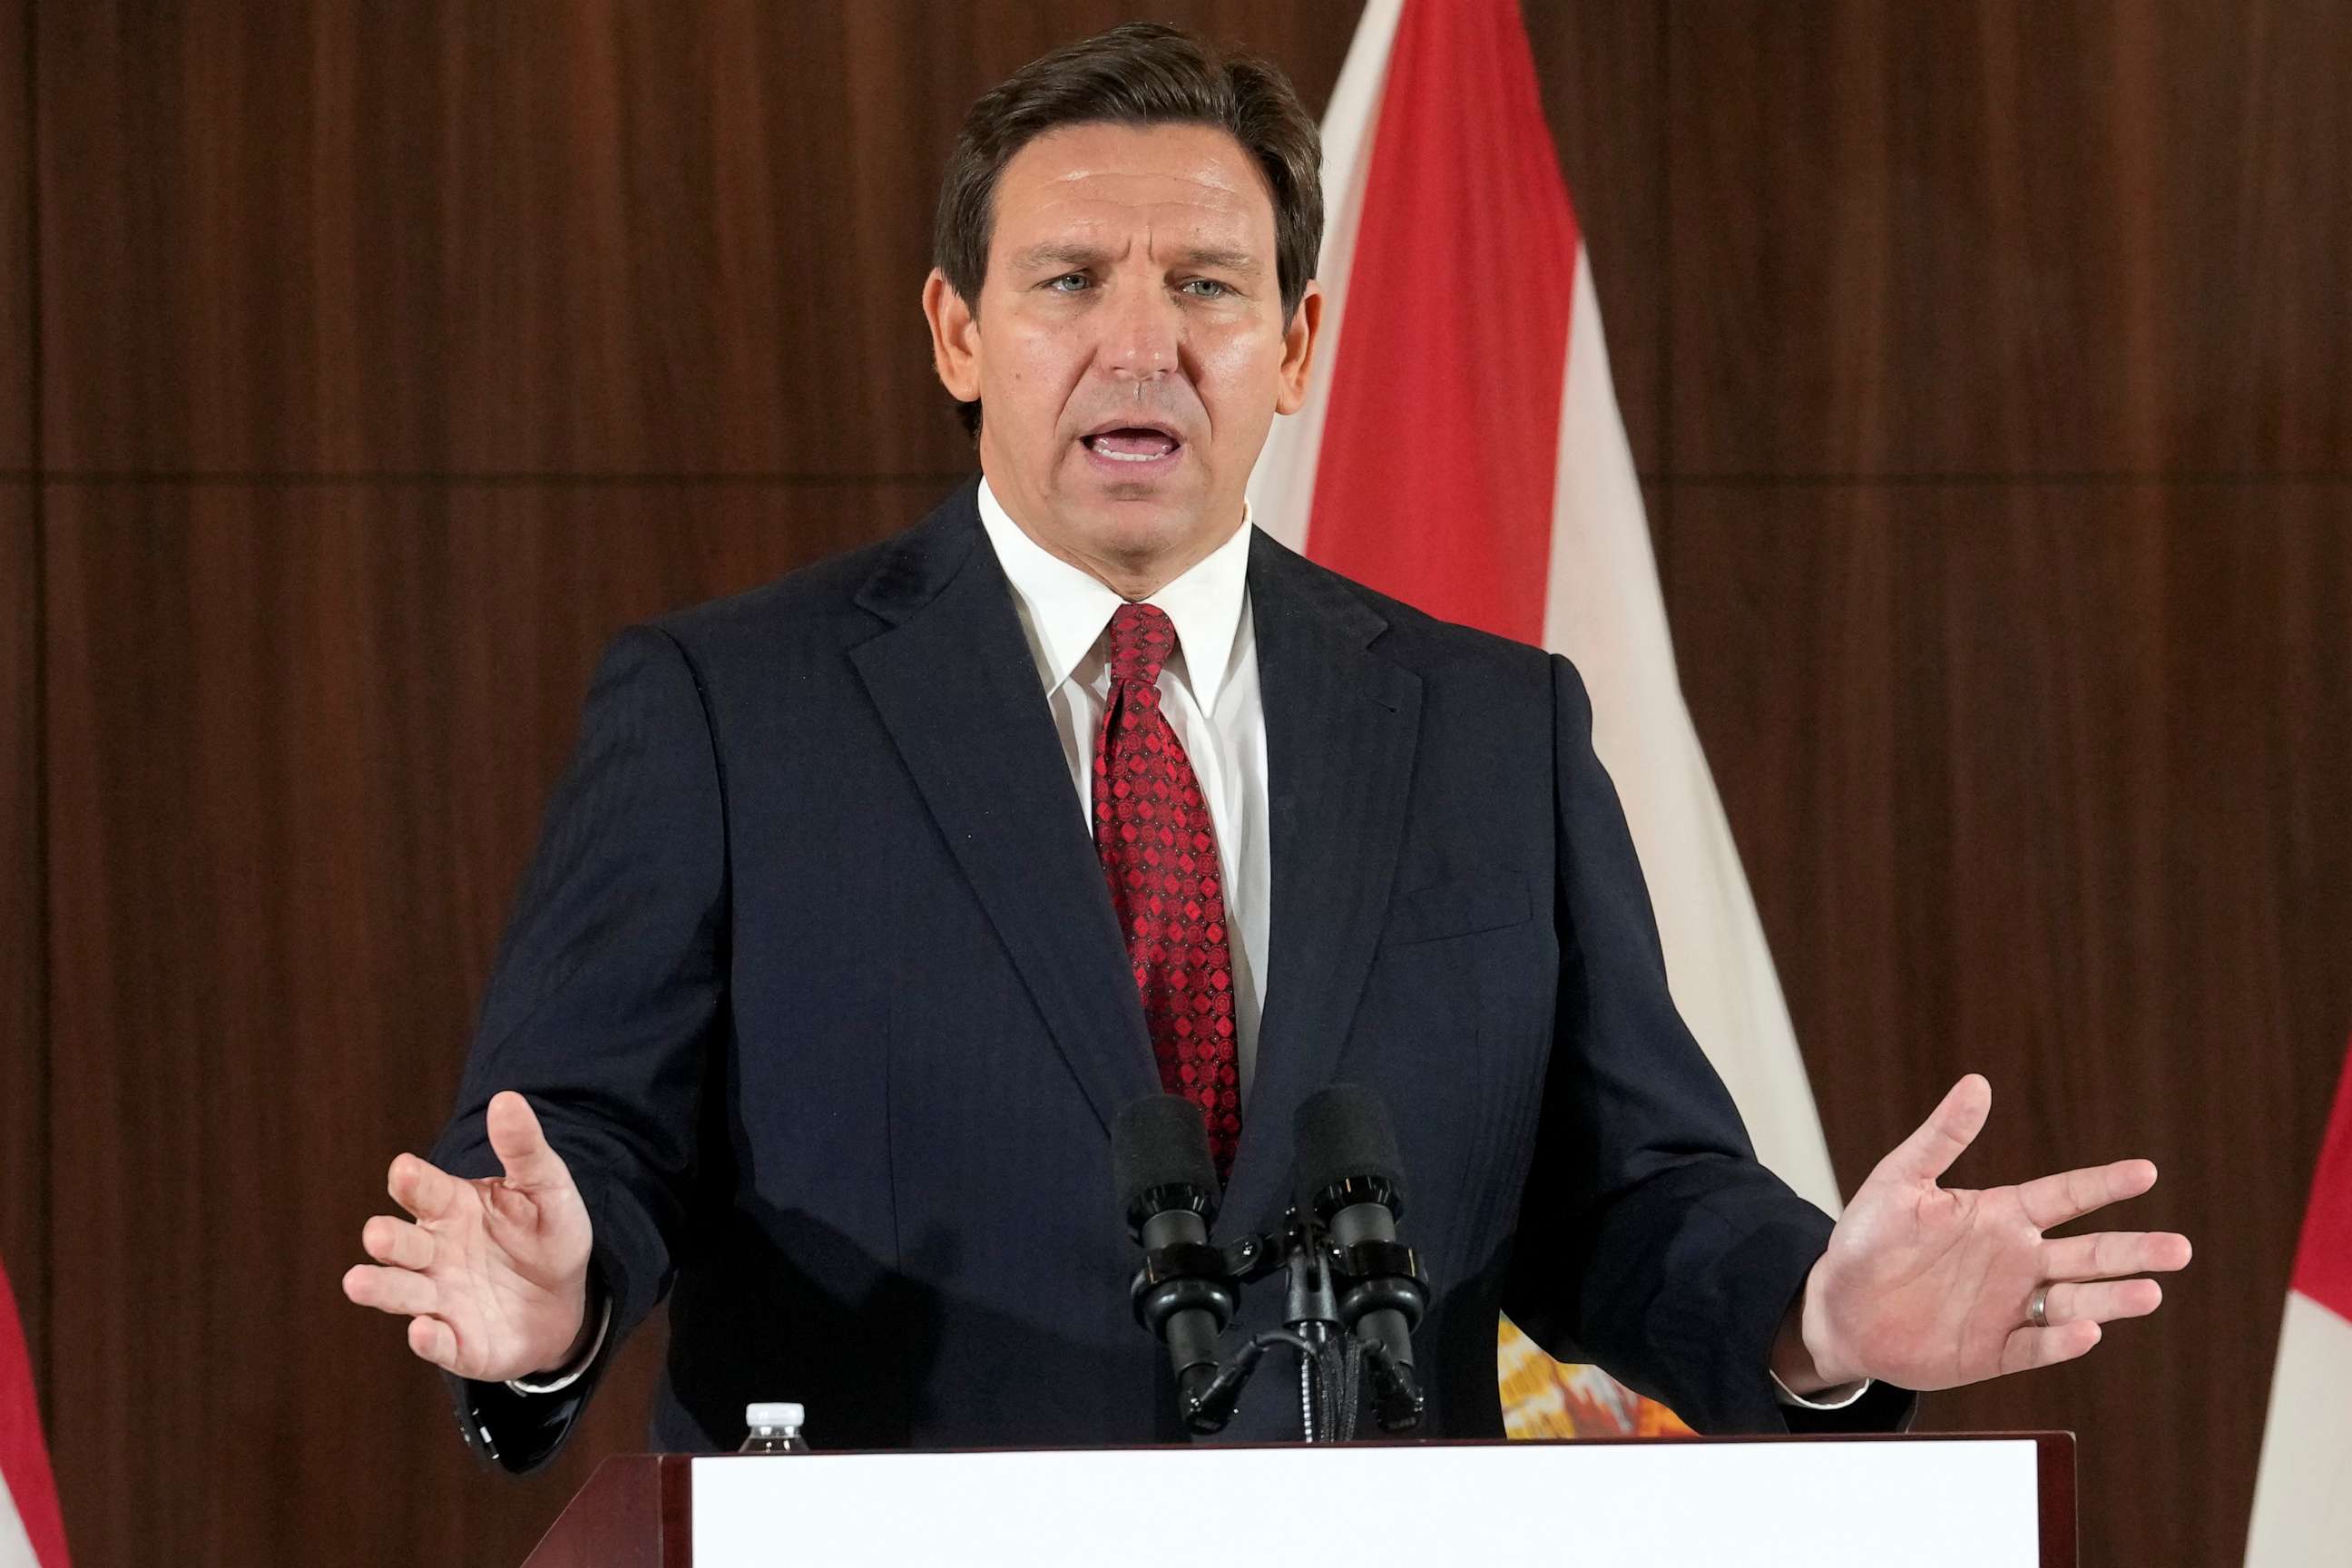 PHOTO: Florida Gov. Ron DeSantis listens to others during a news conference where he spoke of new law enforcement legislation that will be introduced during the upcoming session, Jan. 26, 2023, in Miami.